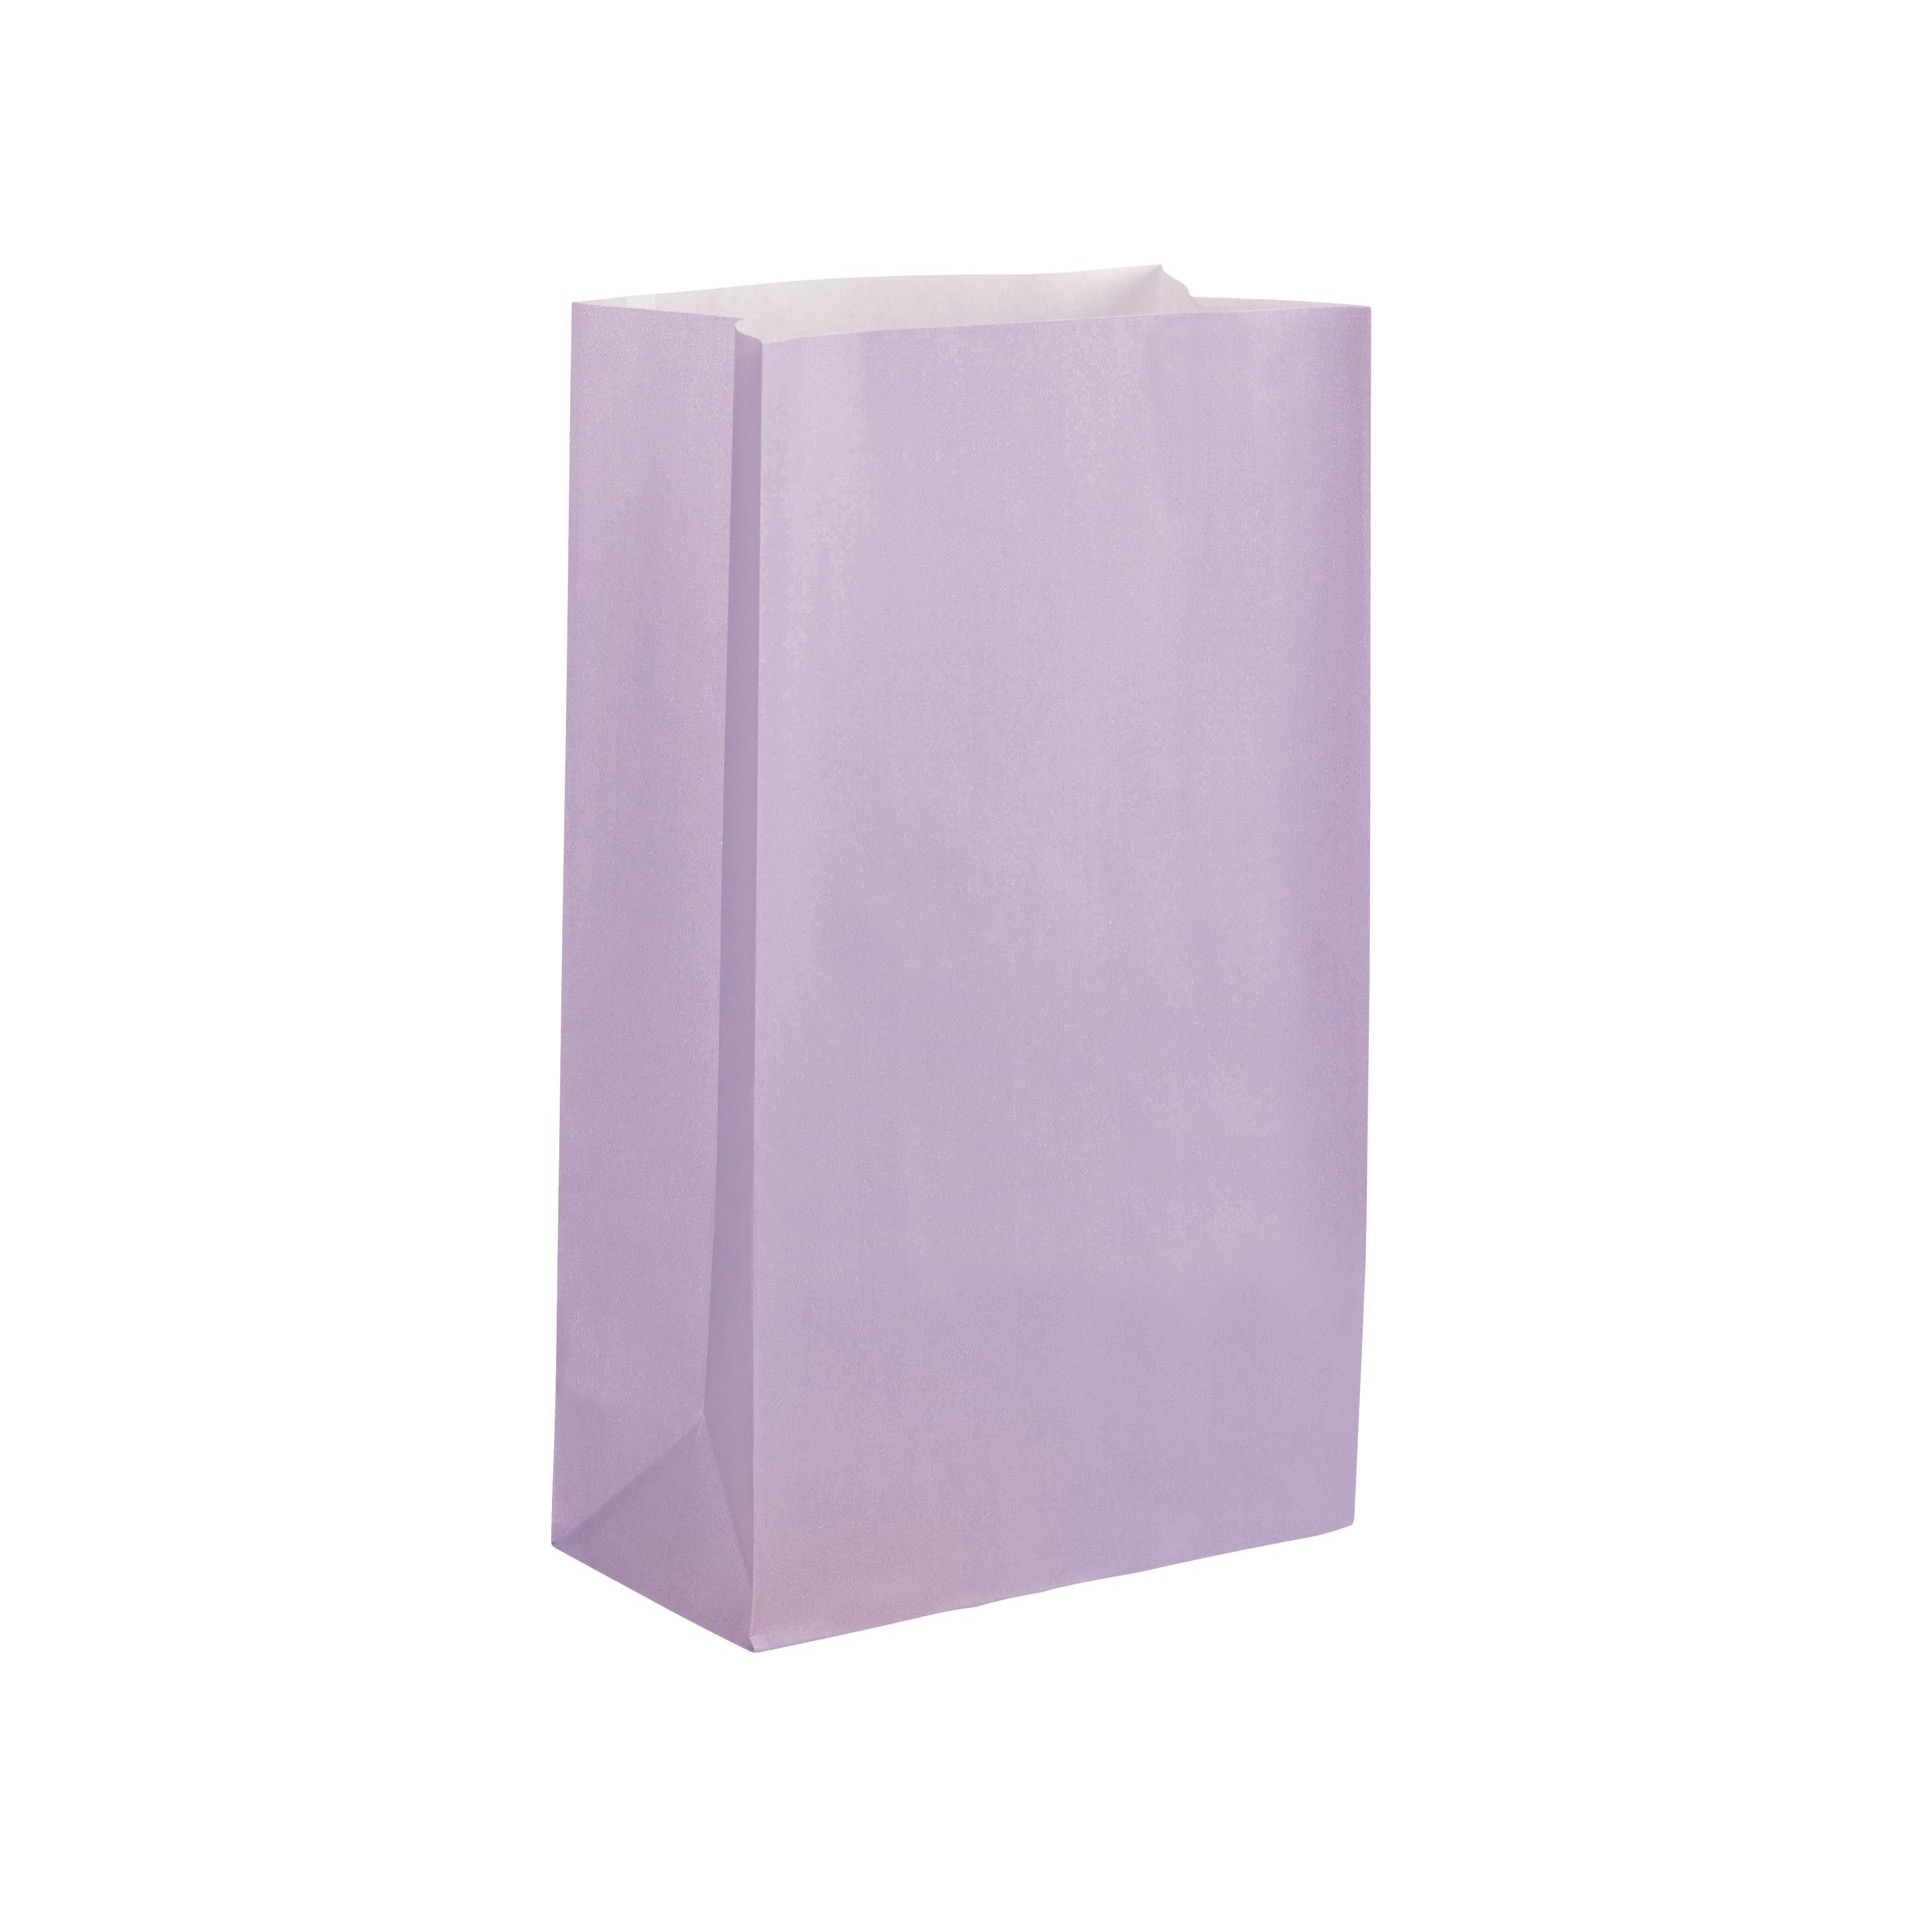 Size 20 x 18 x 8 Lilac Party Paper Carrier Bags with Twisted Paper Handles